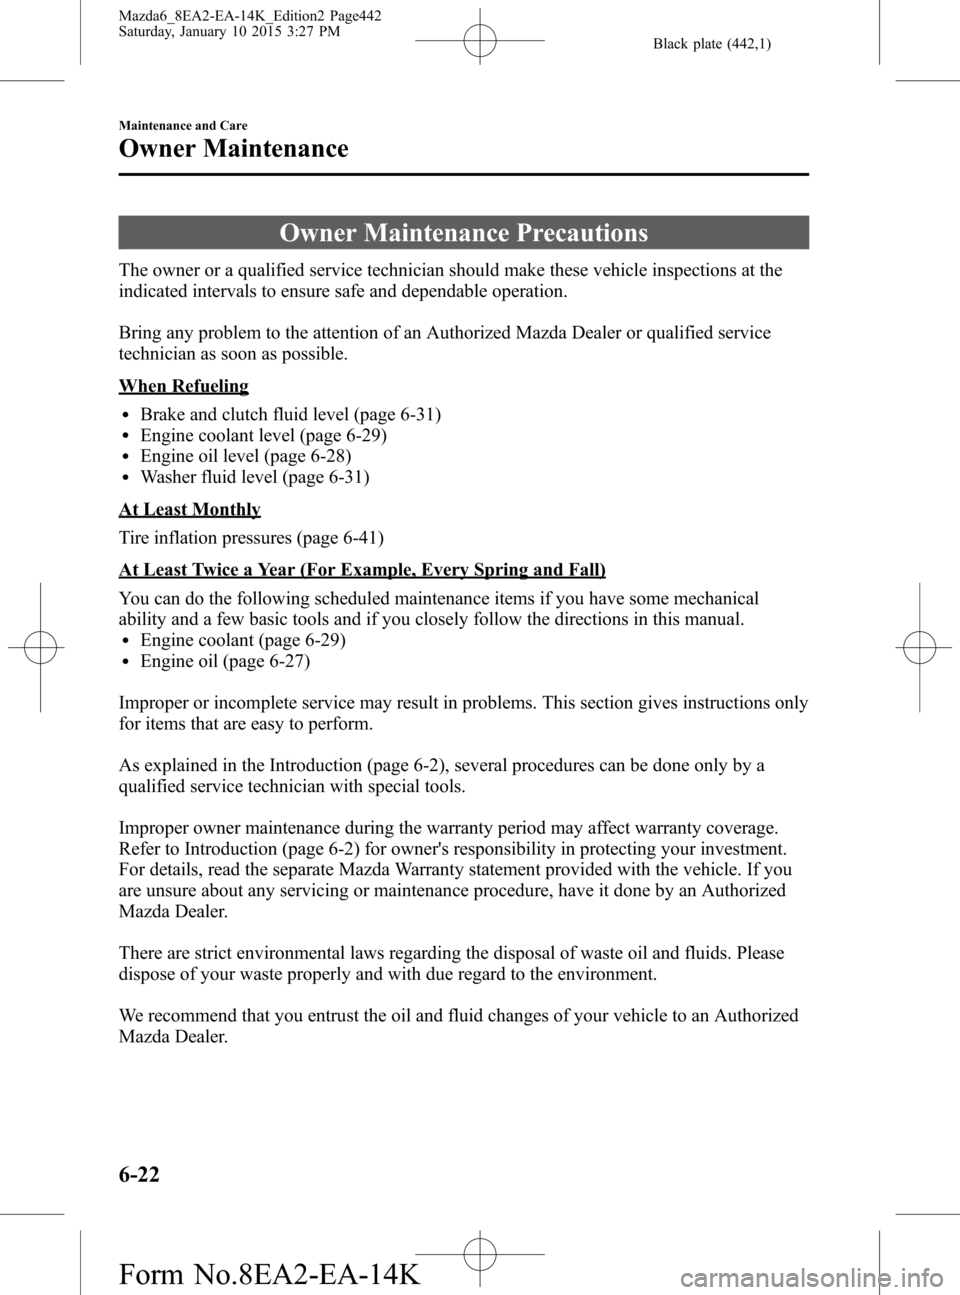 MAZDA MODEL 6 2016  Owners Manual (in English) Black plate (442,1)
Owner Maintenance Precautions
The owner or a qualified service technician should make these vehicle inspections at the
indicated intervals to ensure safe and dependable operation.
